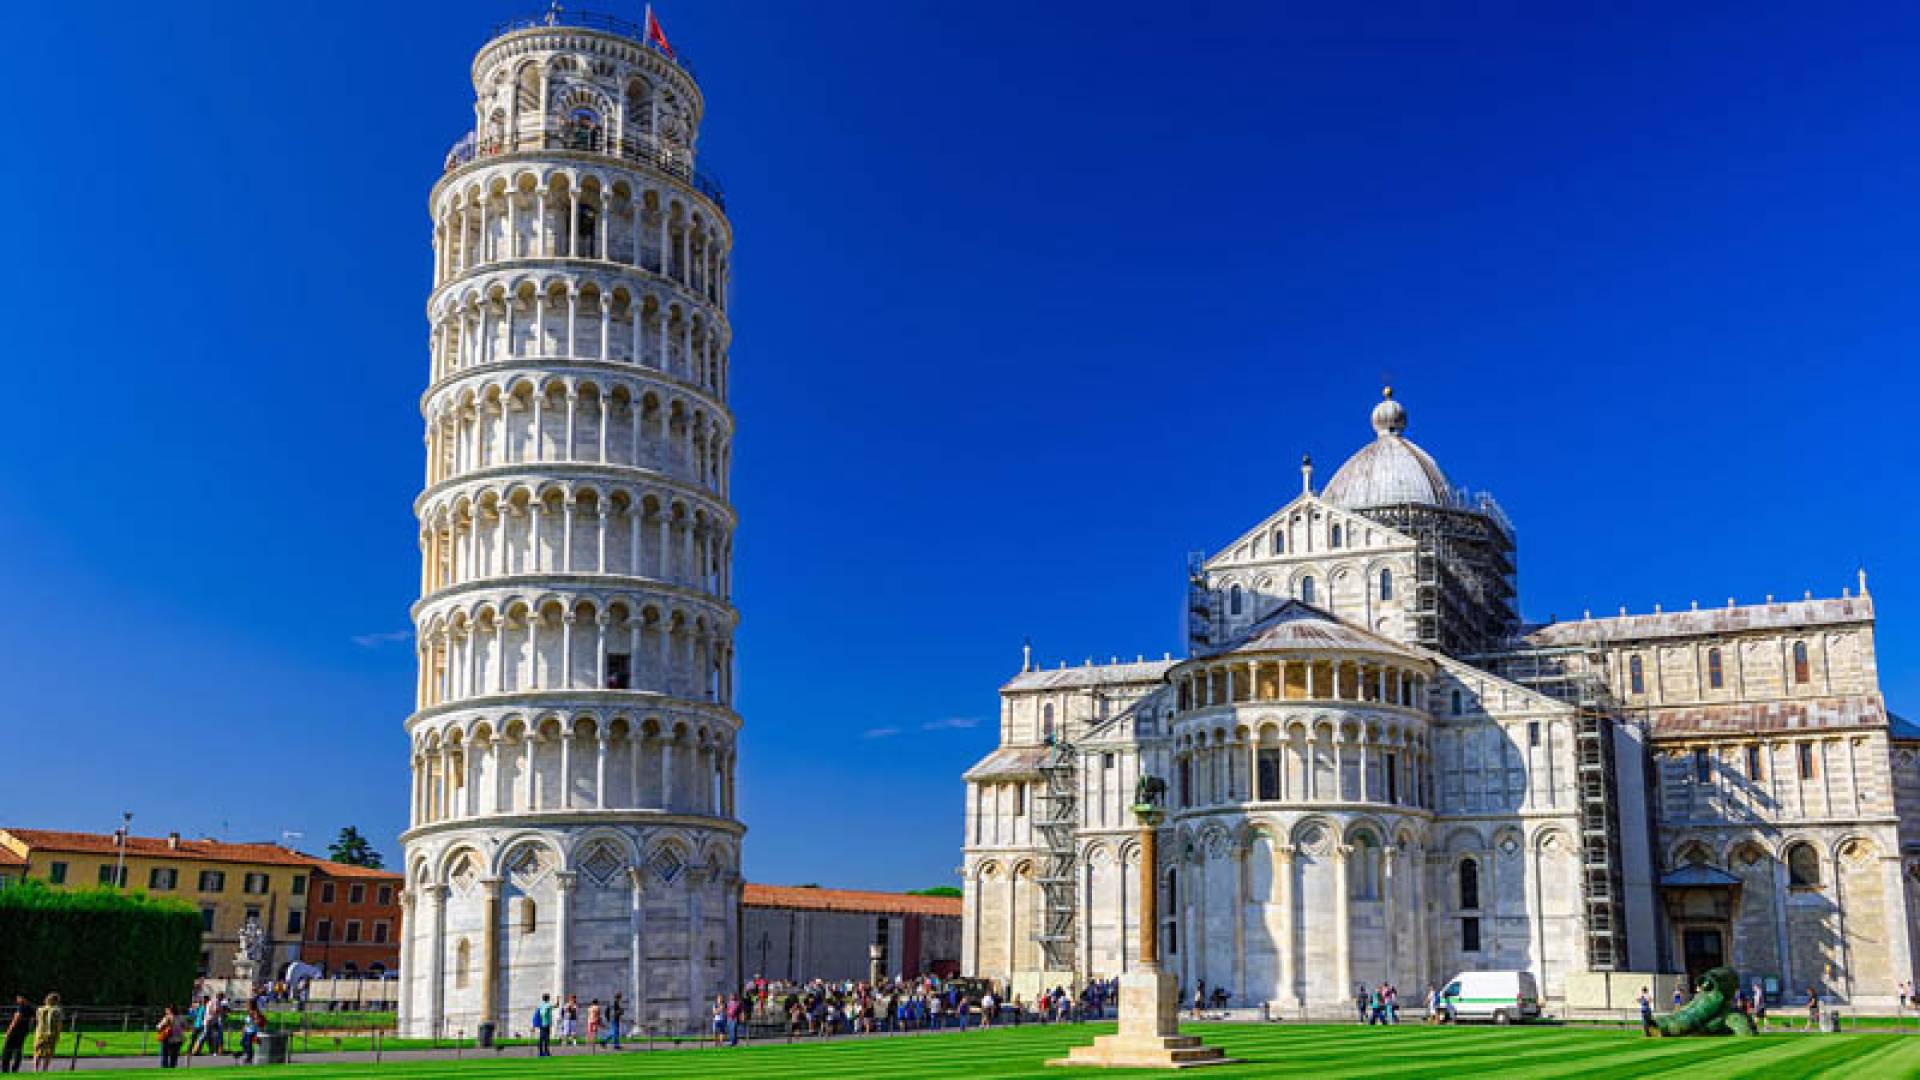 PIAZZA DEI MIRACOLI, Leaning Tower